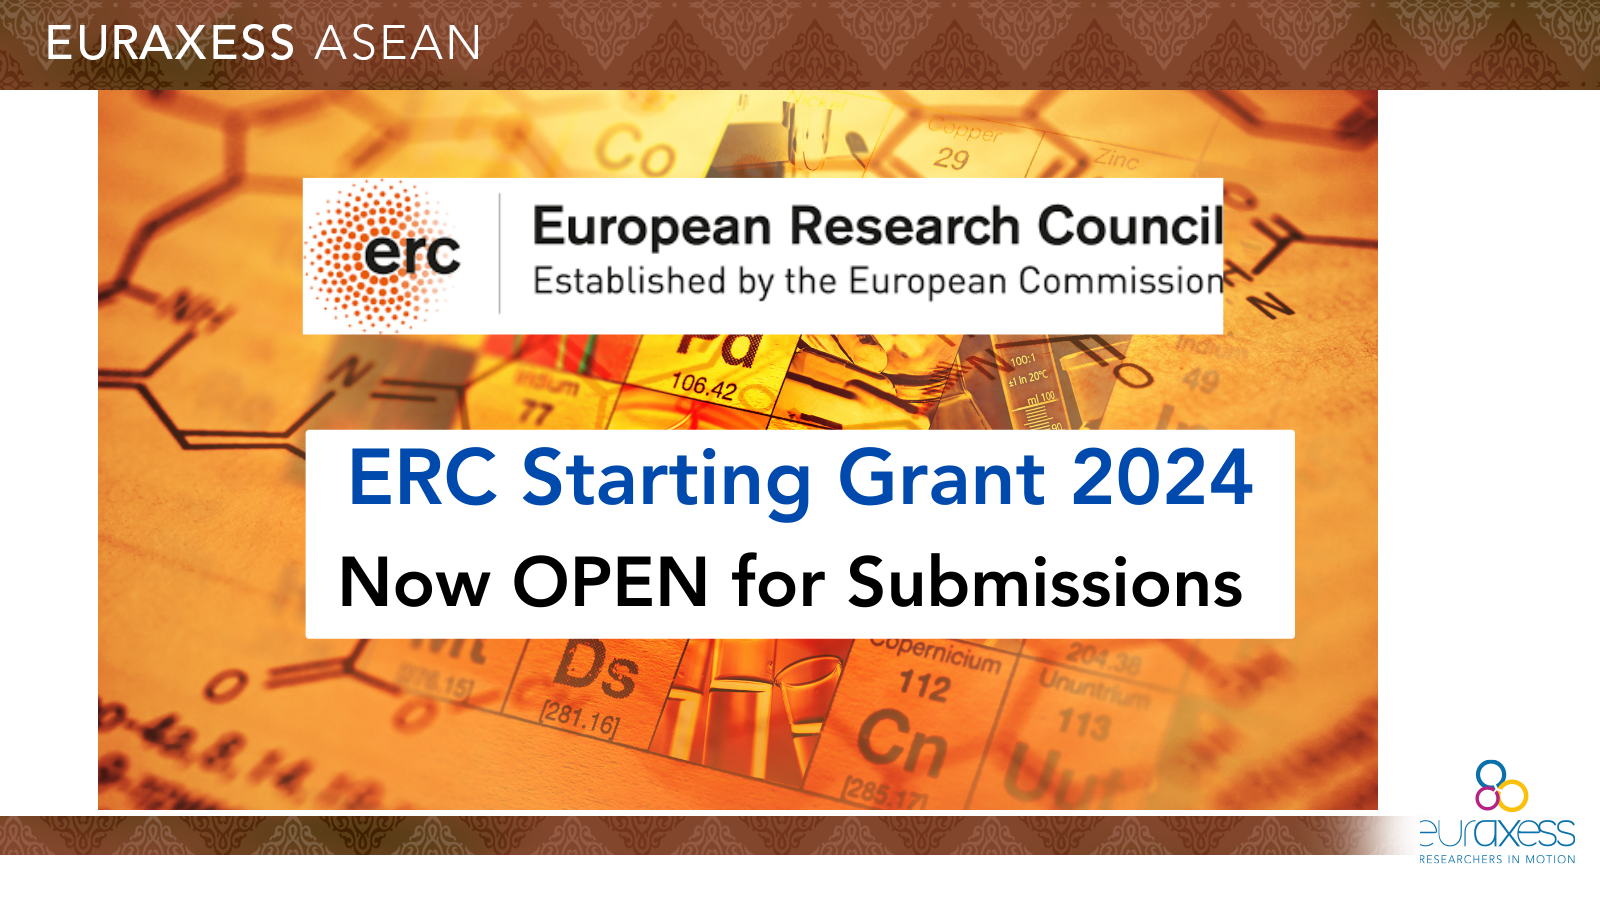 ERC Starting Grant 2024 now open for submissions EURAXESS